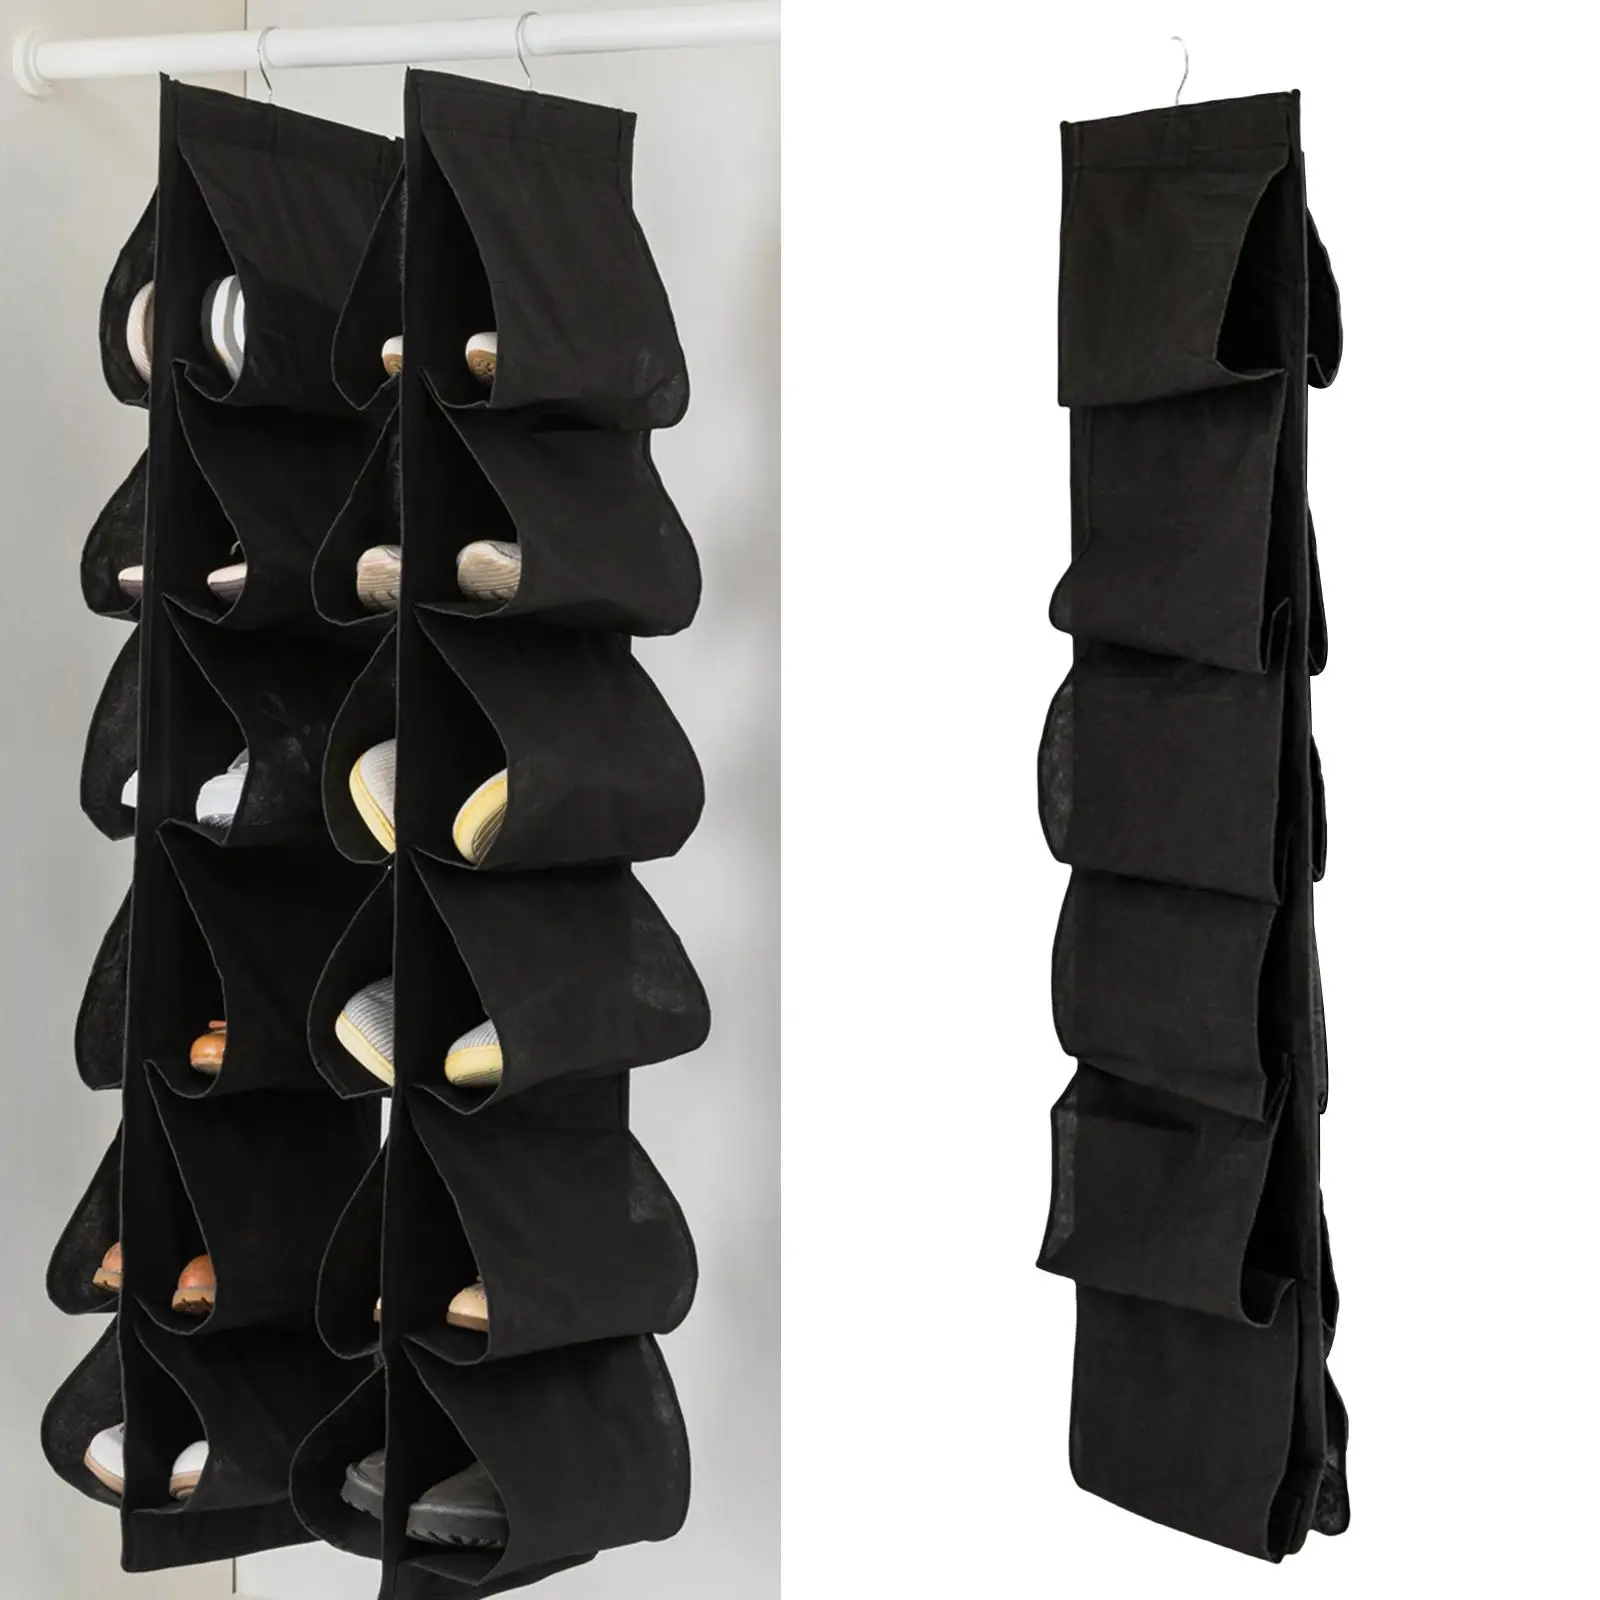 Hanging Shoes Rack Over Closet Shoes Storage Hanging Bag, Door Shoes Rack for Home